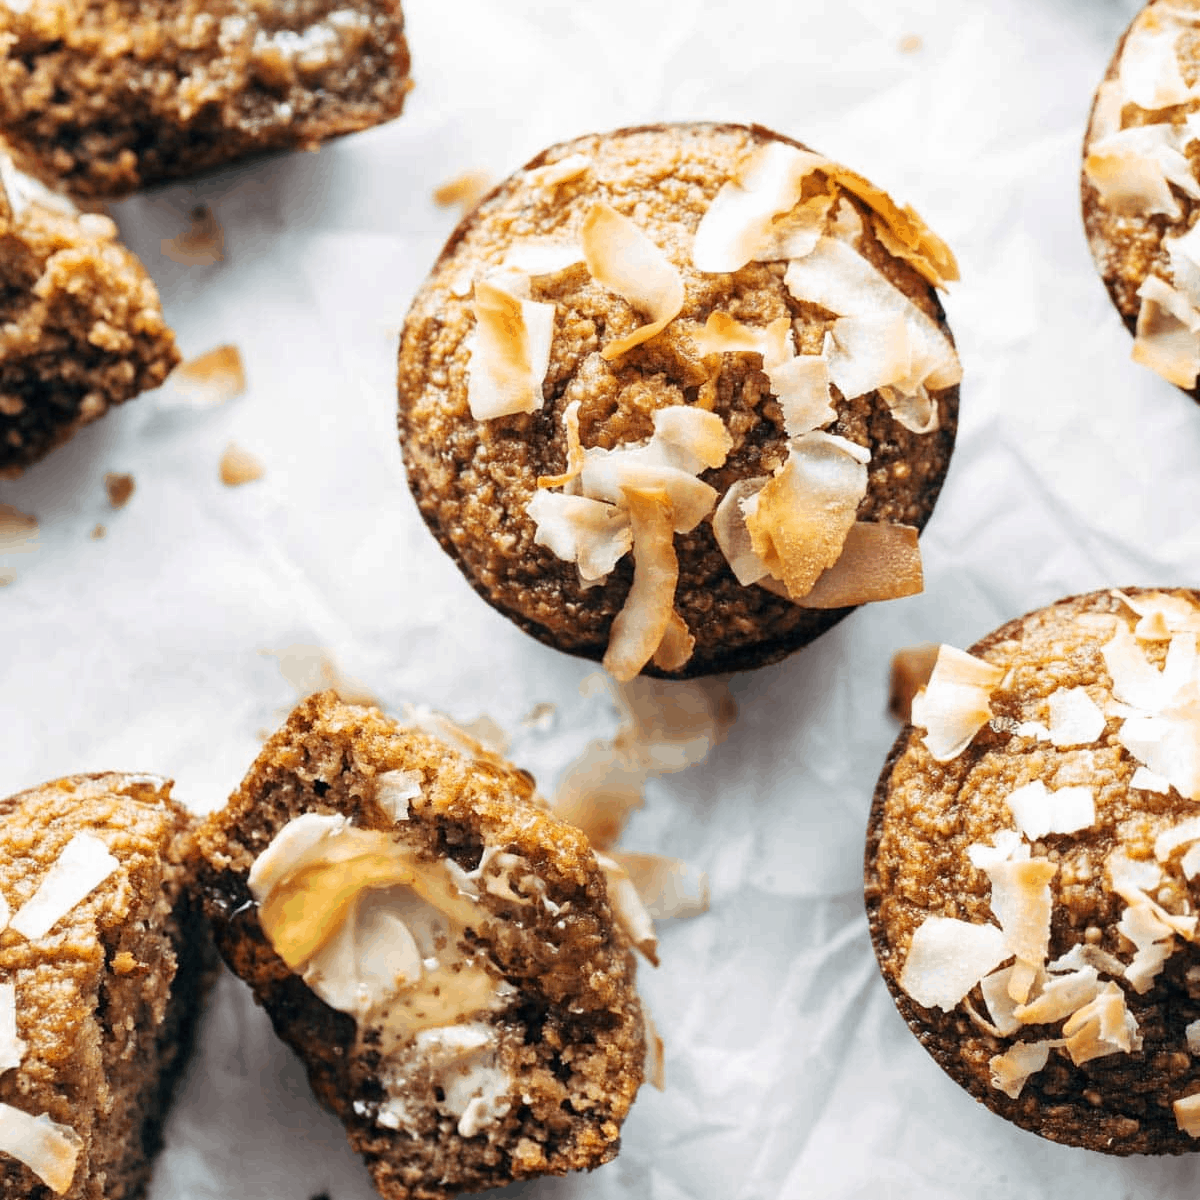 Apple muffins topped with coconut.